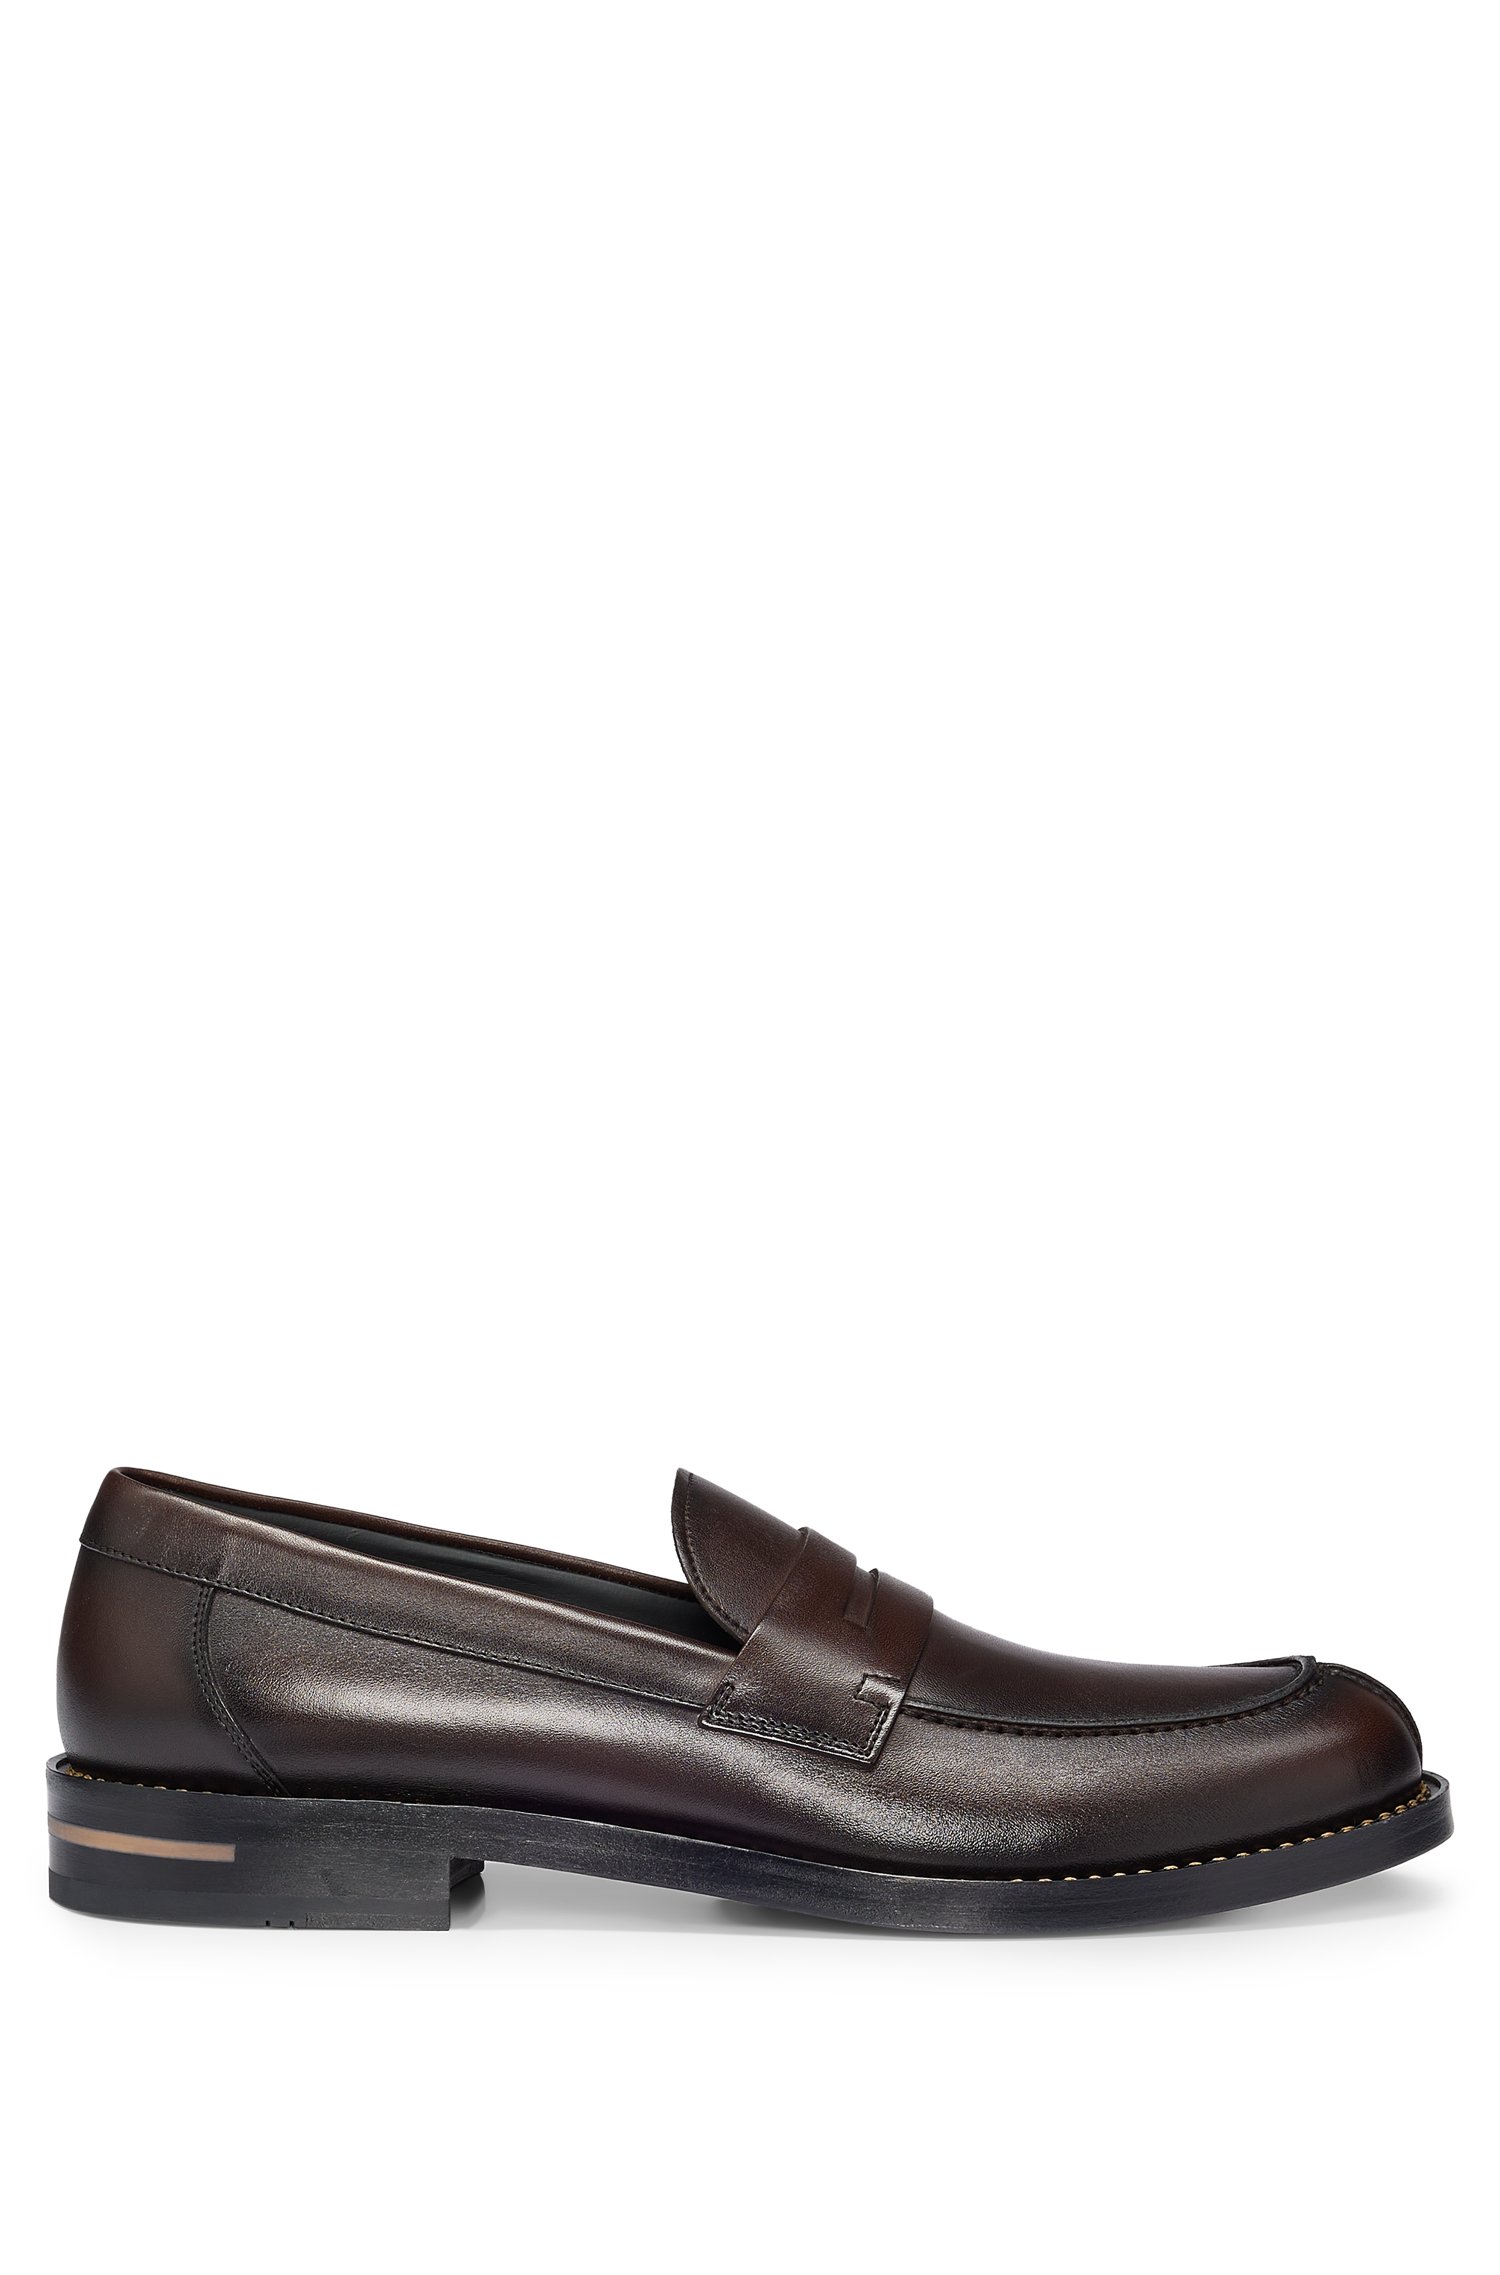 Leather slip-on loafers with penny trim